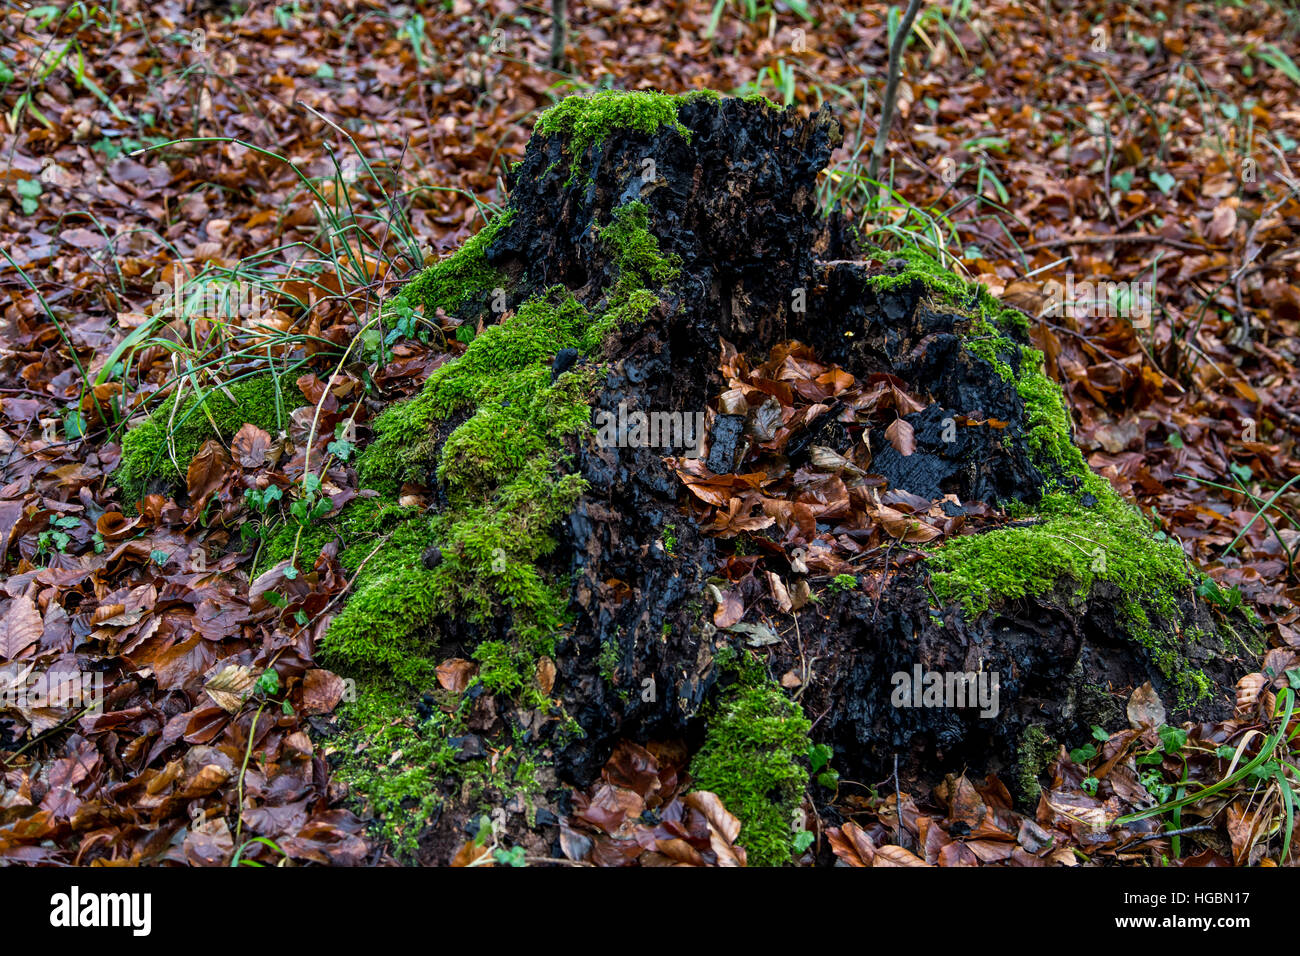 Forest in winter, moss and leaves on dead trees, tree branches, tree trunks, Stock Photo